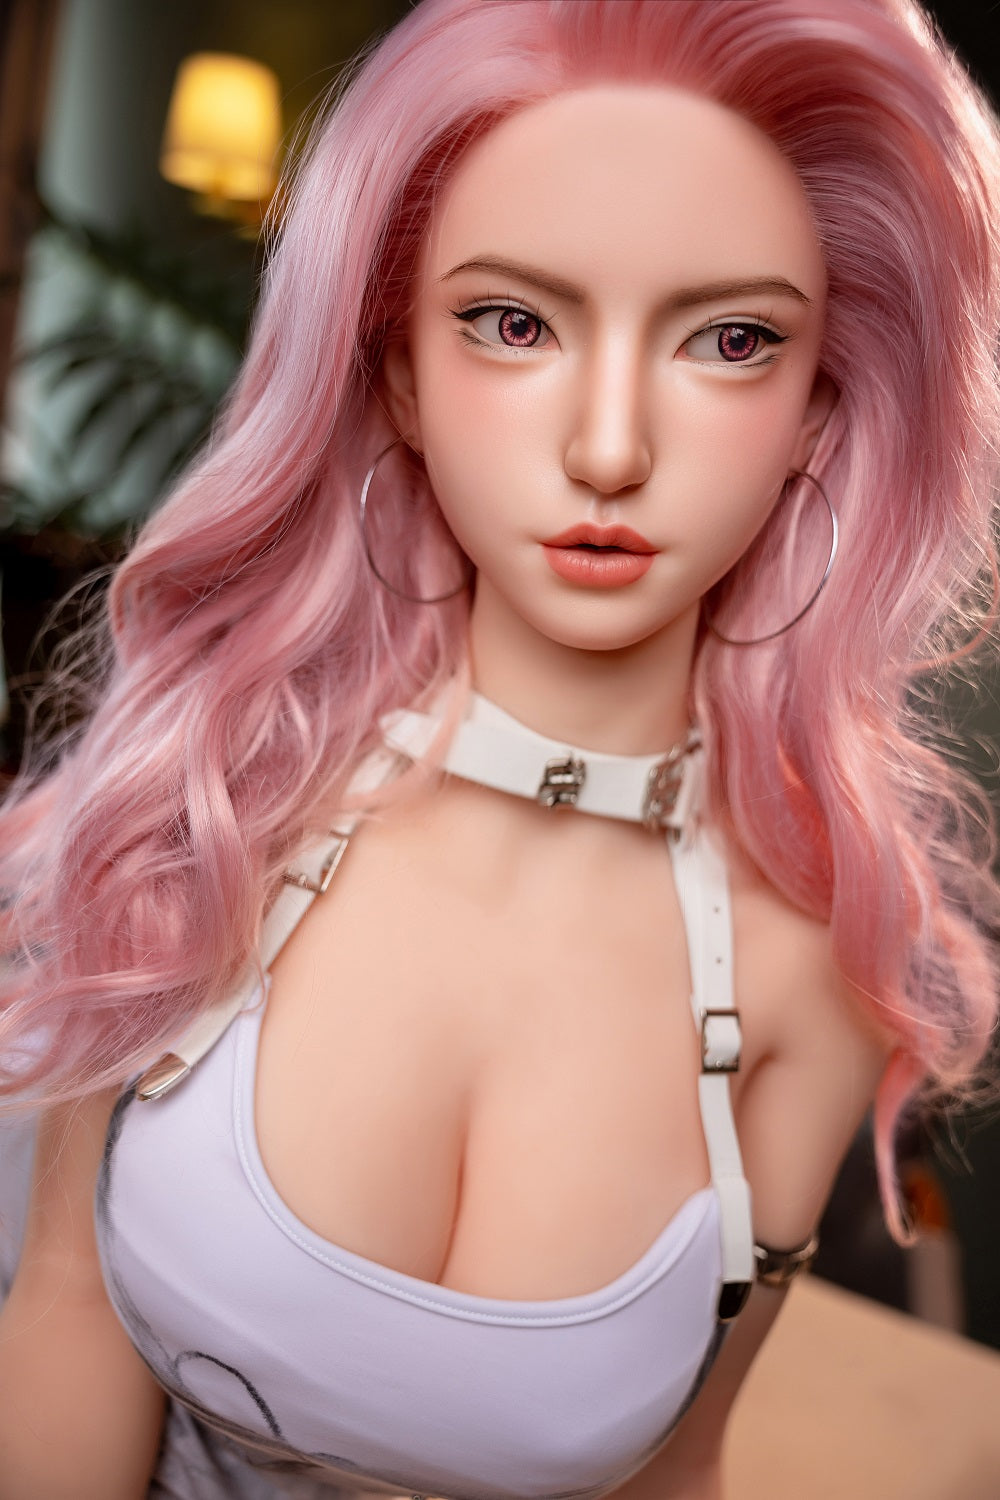 US Stock - YAMIEE Rylee  5ft35 / 163cm Unique Design Silicone Head Sex Doll TPE Body Sweet Best Realistic Sex Doll For Belowjob Gel Breasts Articulated Finger